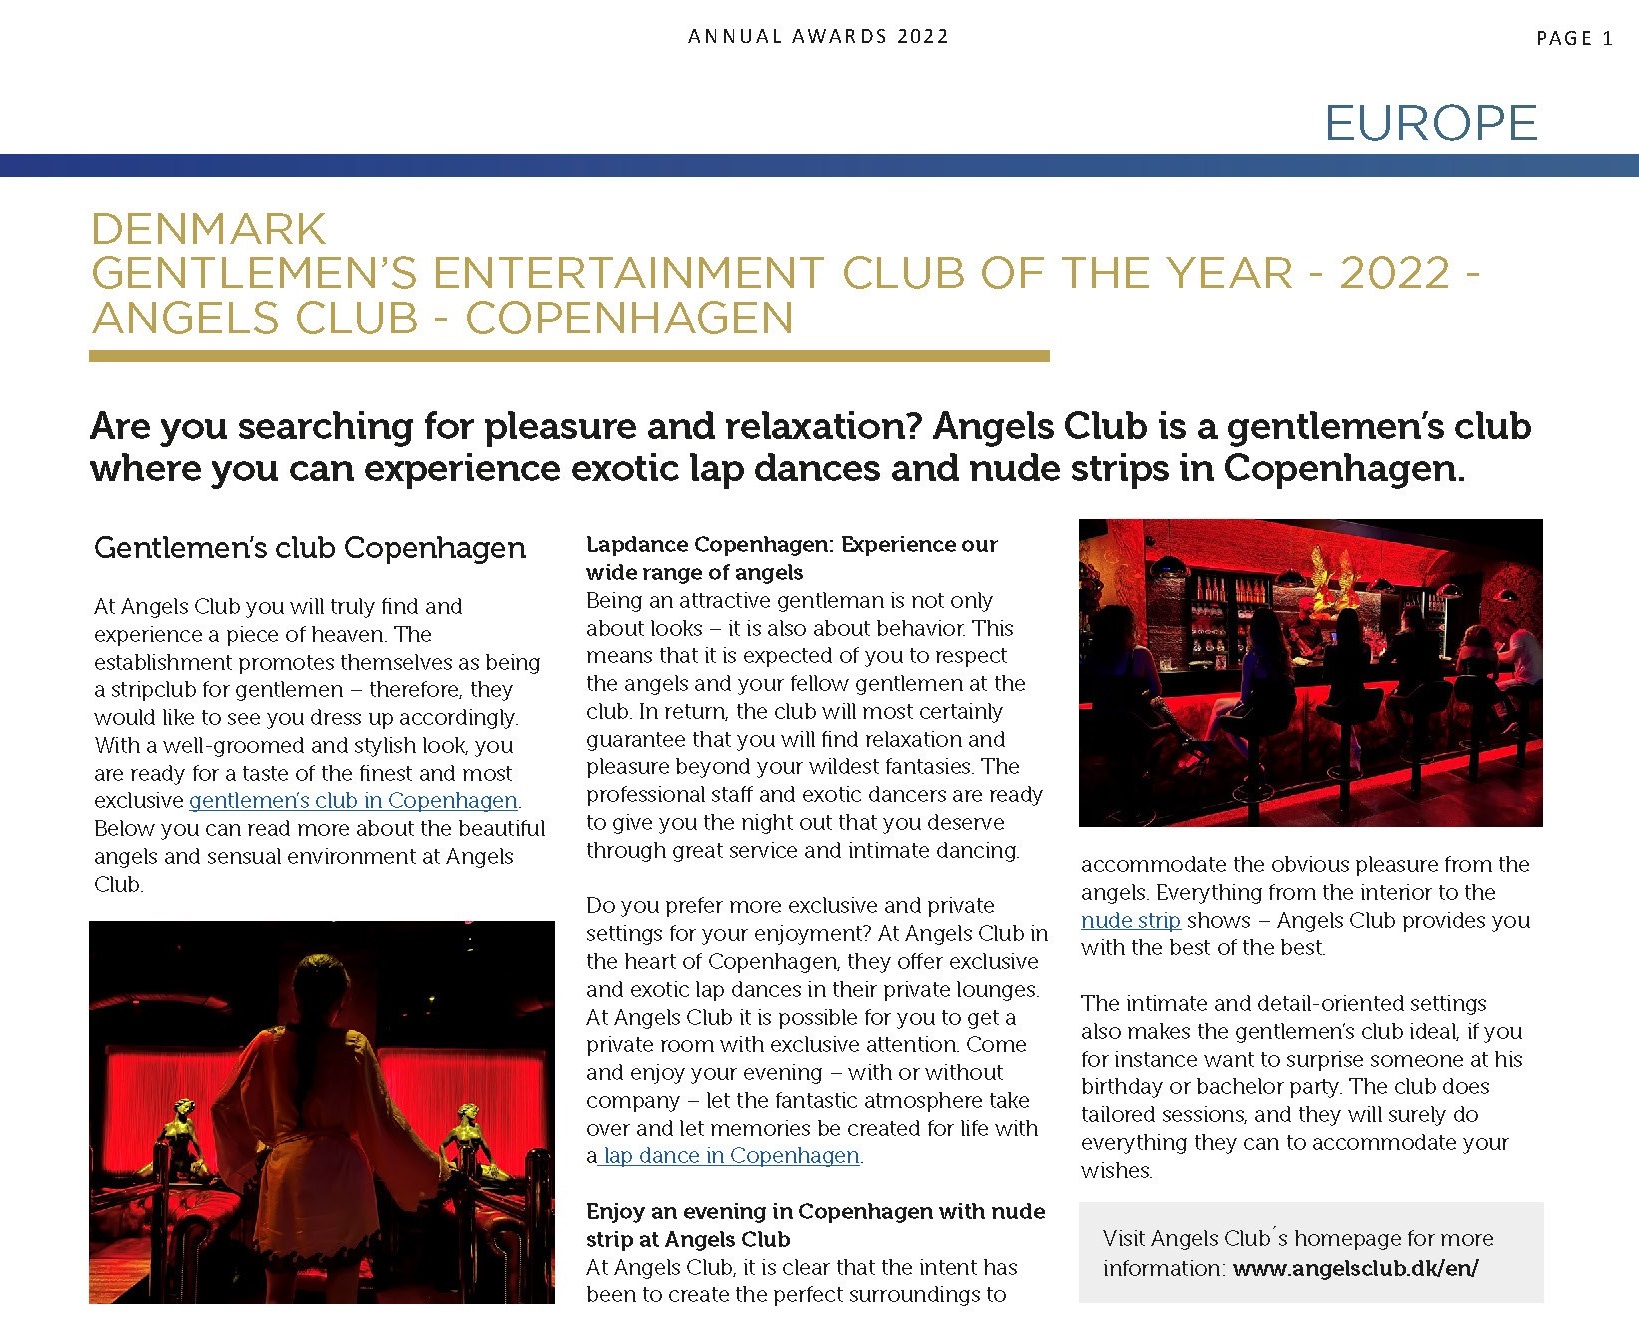 Article about Angels Club